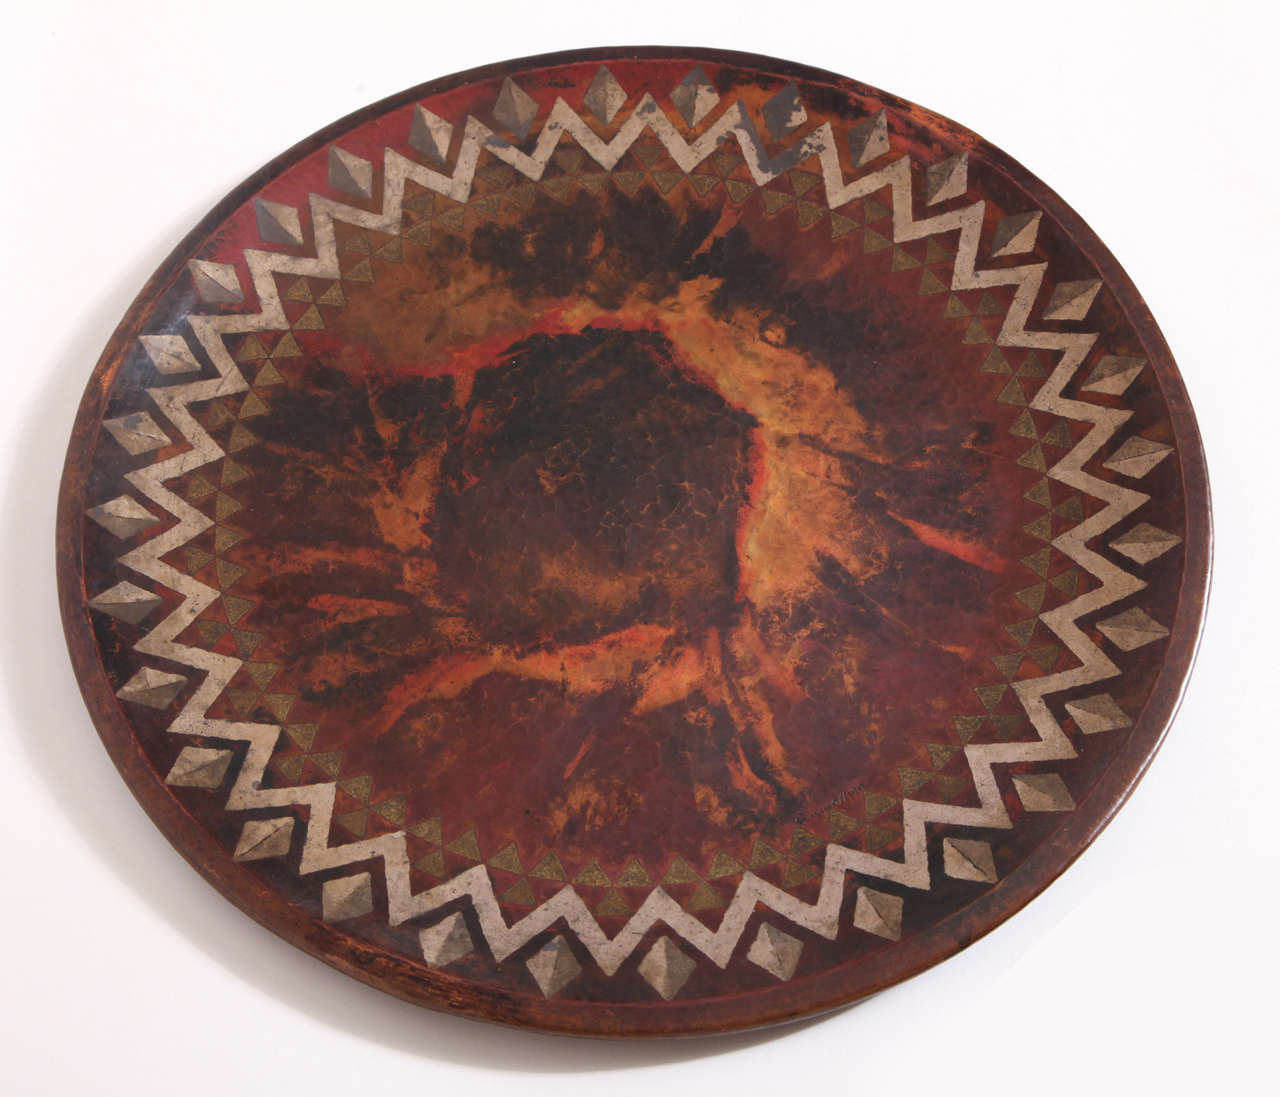 This circular dinanderie tray has a chevron and zig zag design around the periphery.
Signed: 'CL-LINOSSIER' incised

Literature:
Jean Gaillard, Claudius Linossier Dinandier, Editions Lyonnaises d'Art et d'Histoire, Lyon, 1994, p. 167 for a